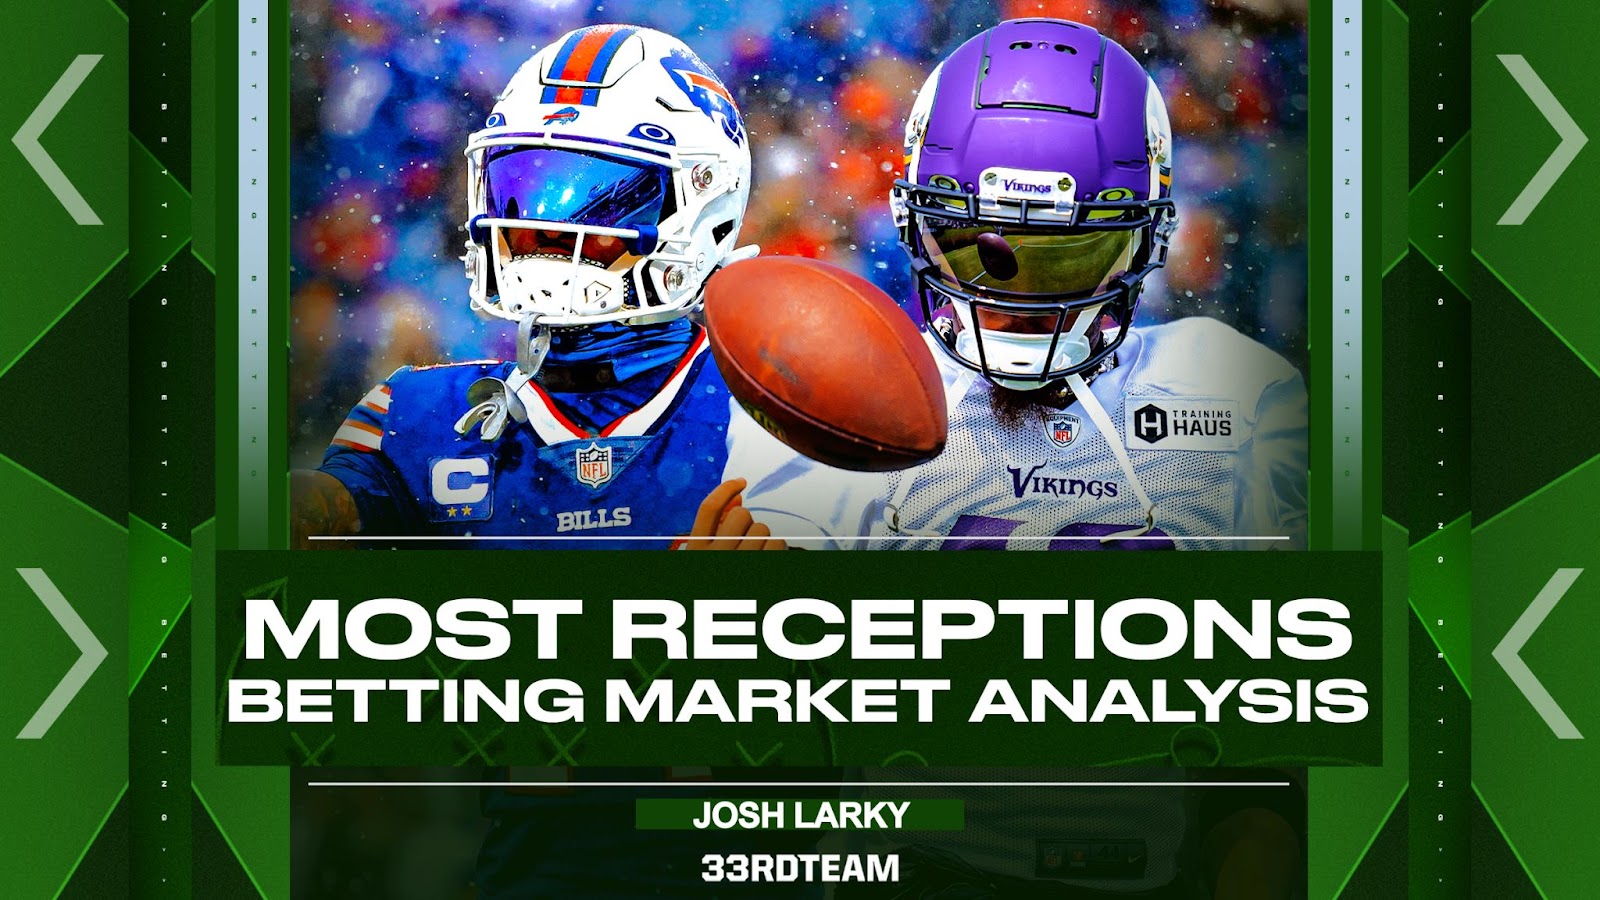 2023 NFL Betting: Guide to NFL Reception Leader Market